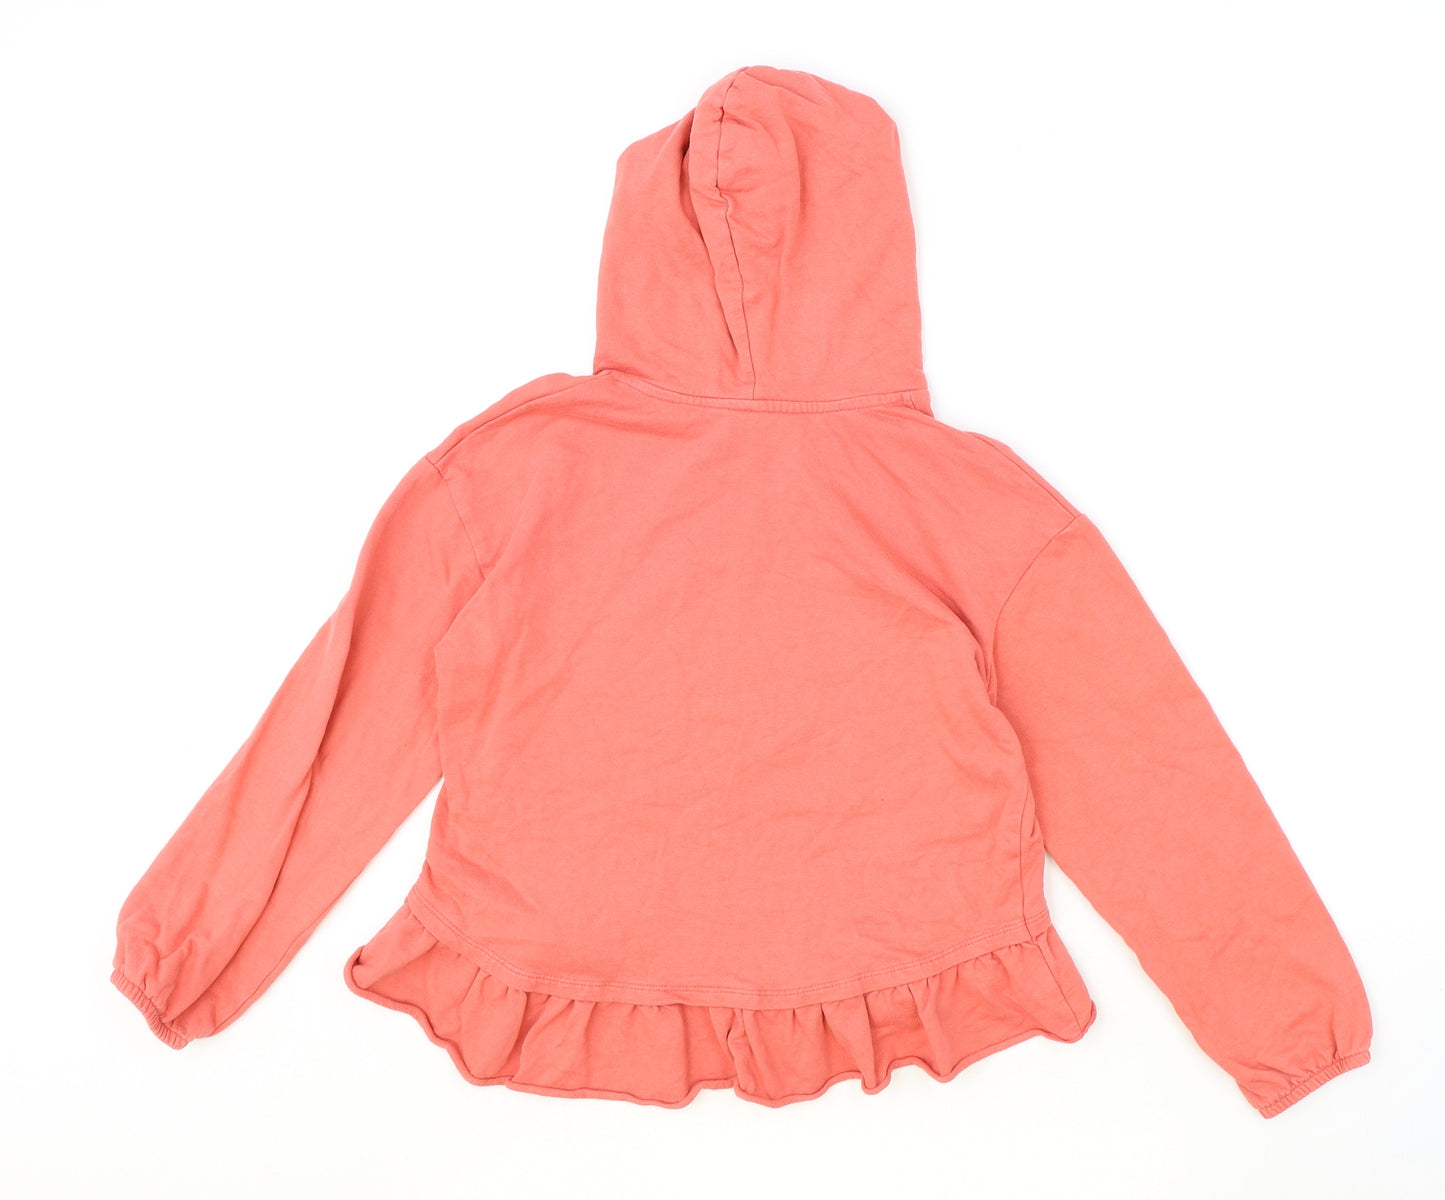 George Girls Pink 100% Cotton Pullover Hoodie Size 8-9 Years Pullover - Stay Wonderful